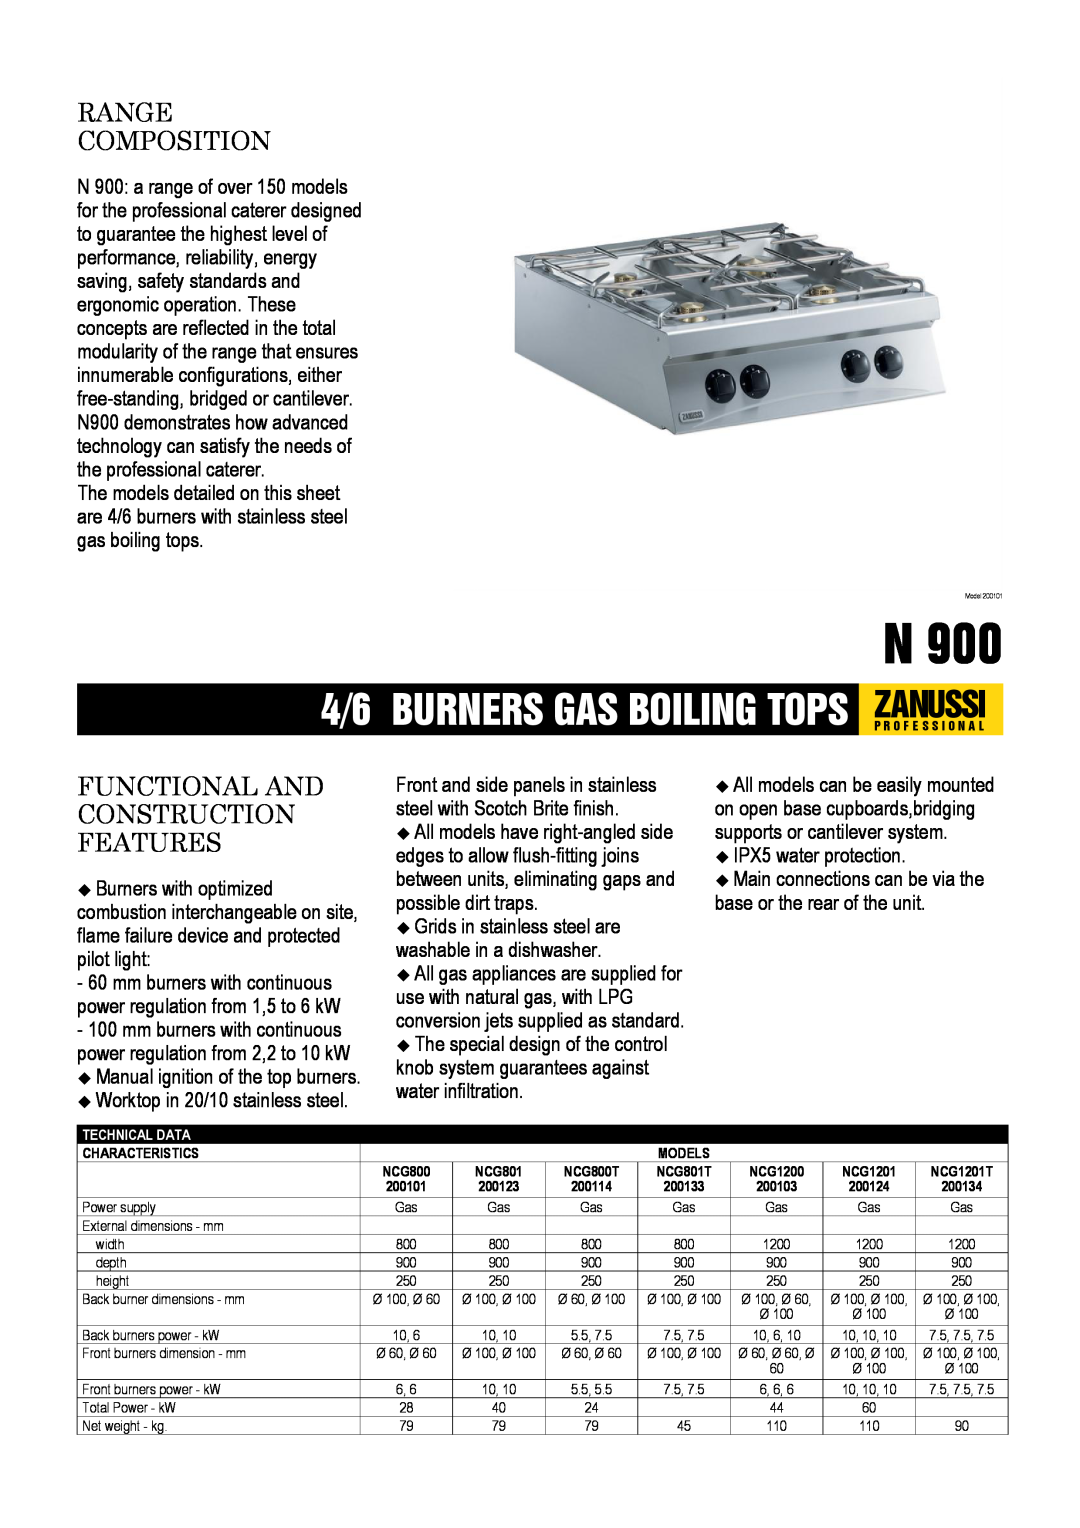 Zanussi NCG801T, NCG800T dimensions Manual ignition of the top burners Worktop in 20/10 stainless steel, Range Composition 